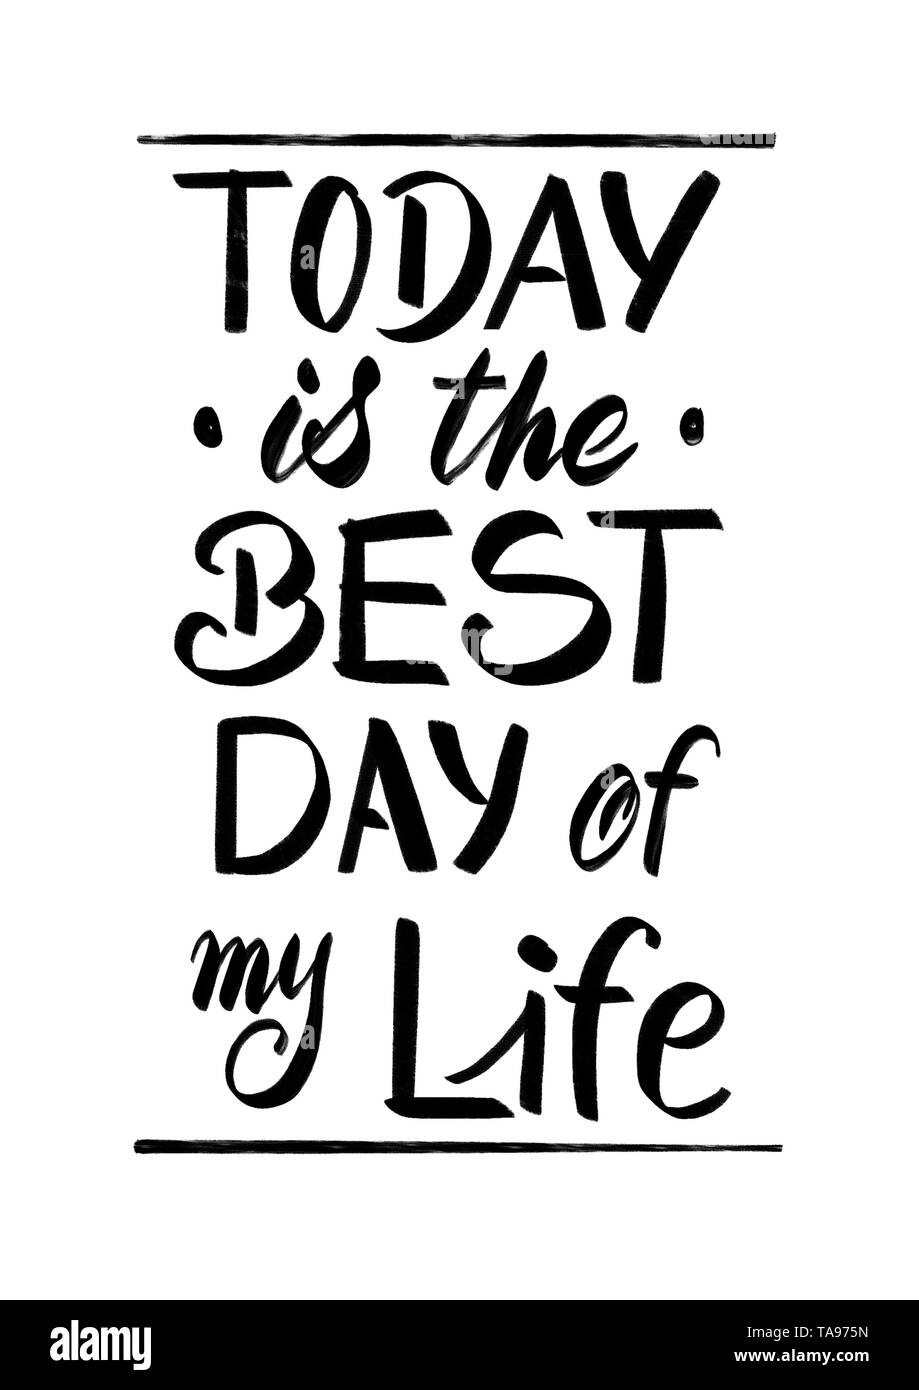 Today is the best day of my life - hand lettering composition in black and white Stock Photo